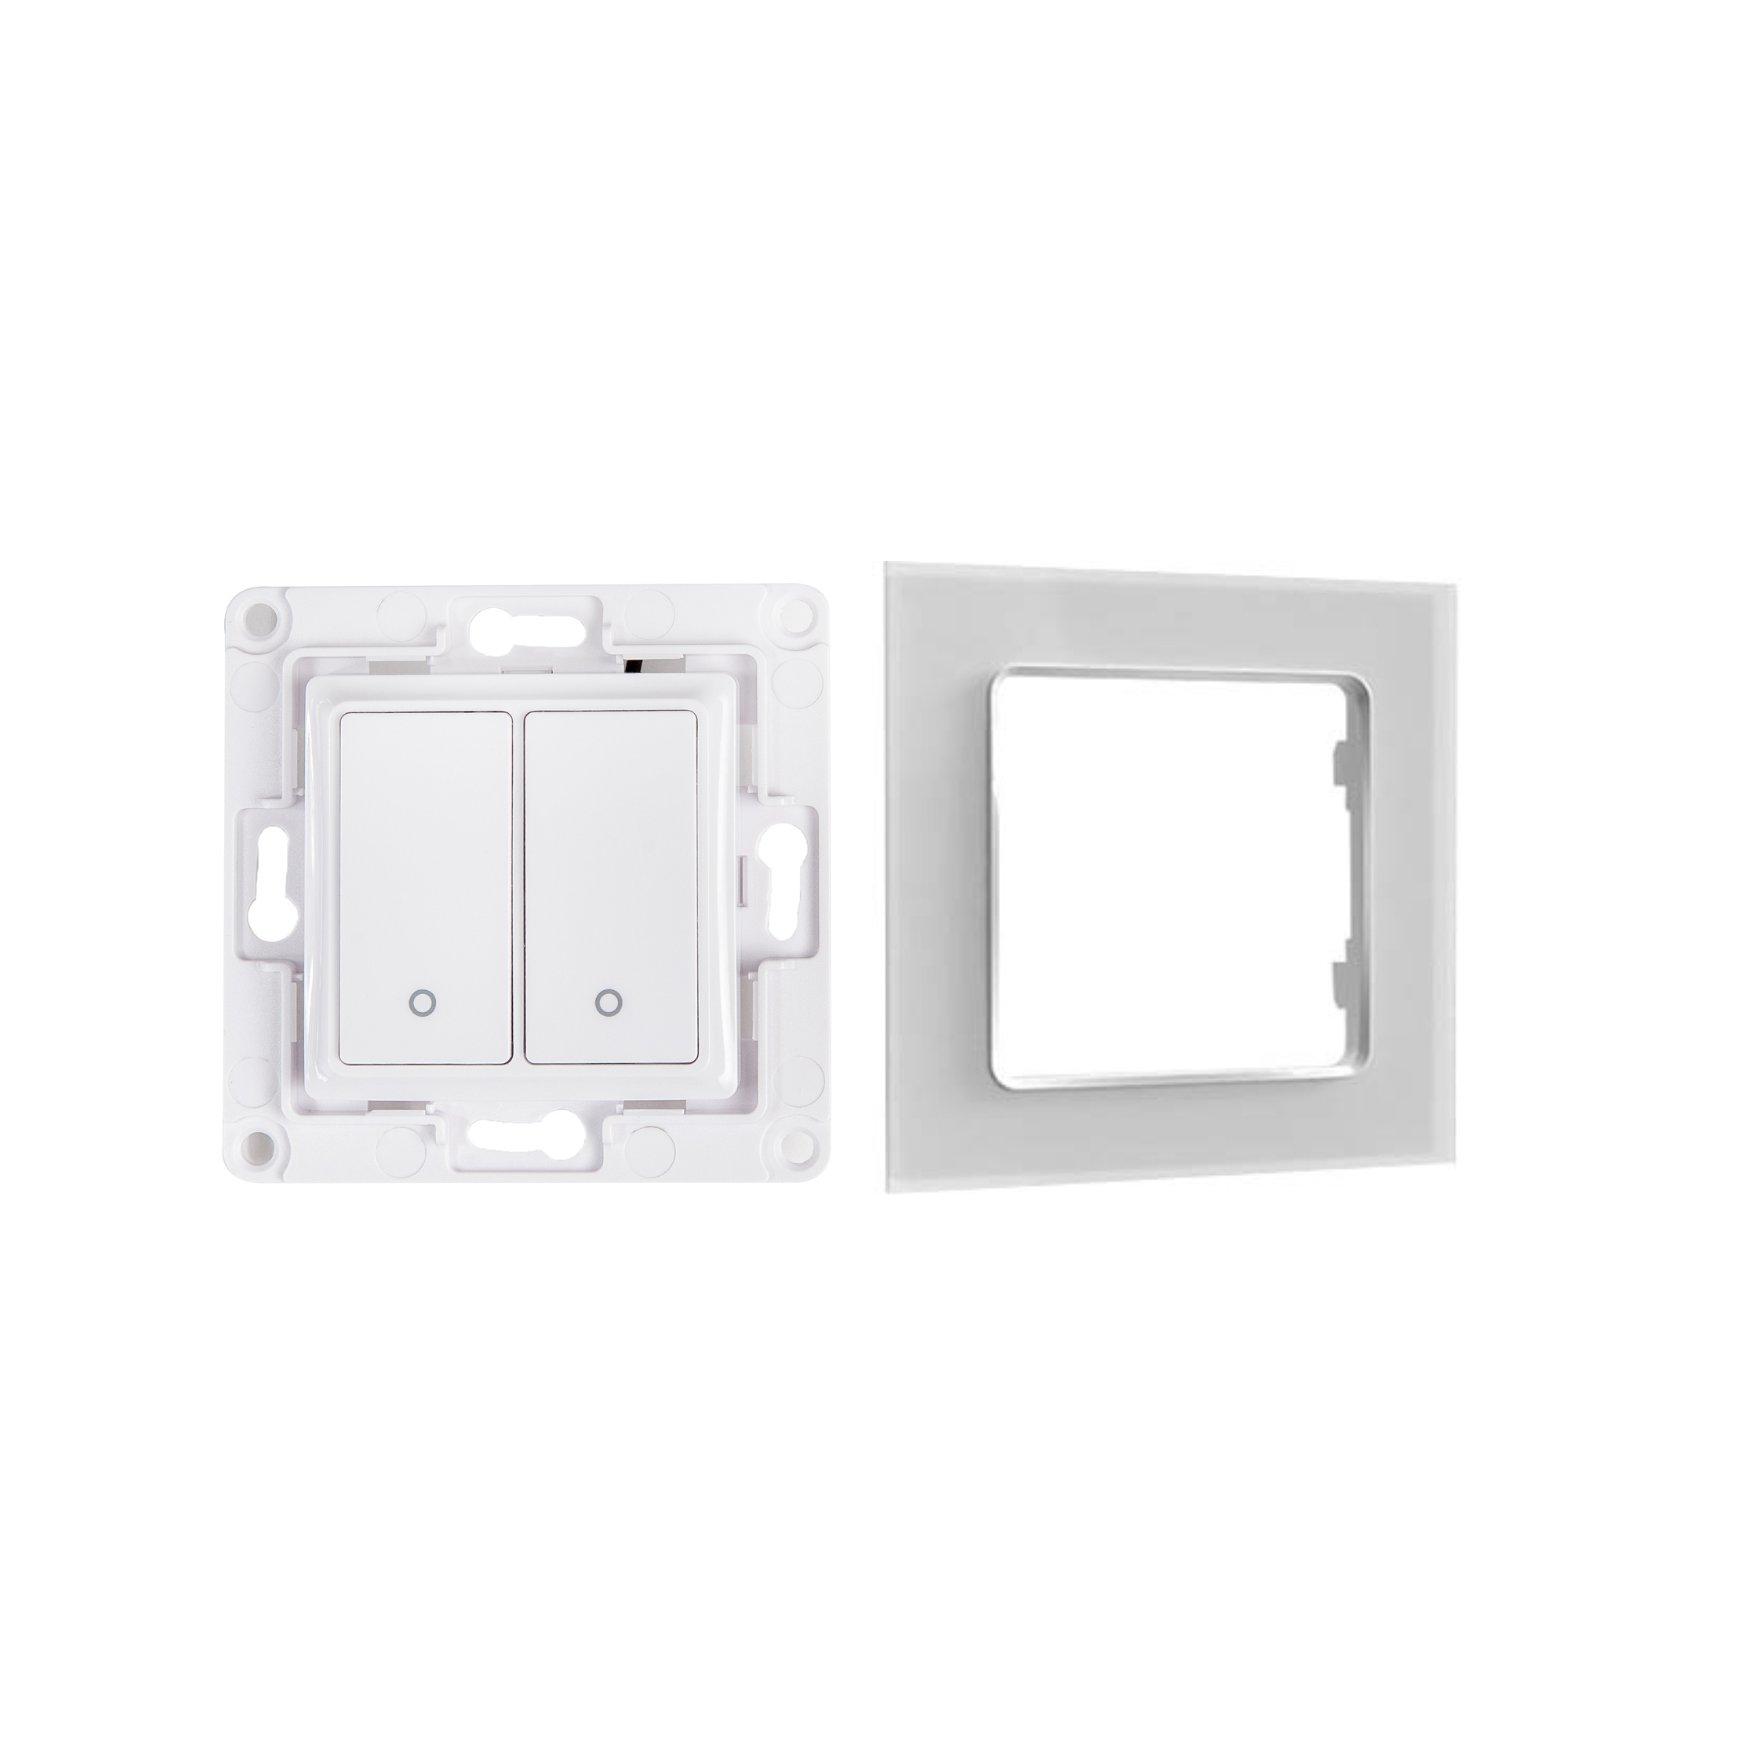 shelly/parent-img-white-wall-switch-bundle-2